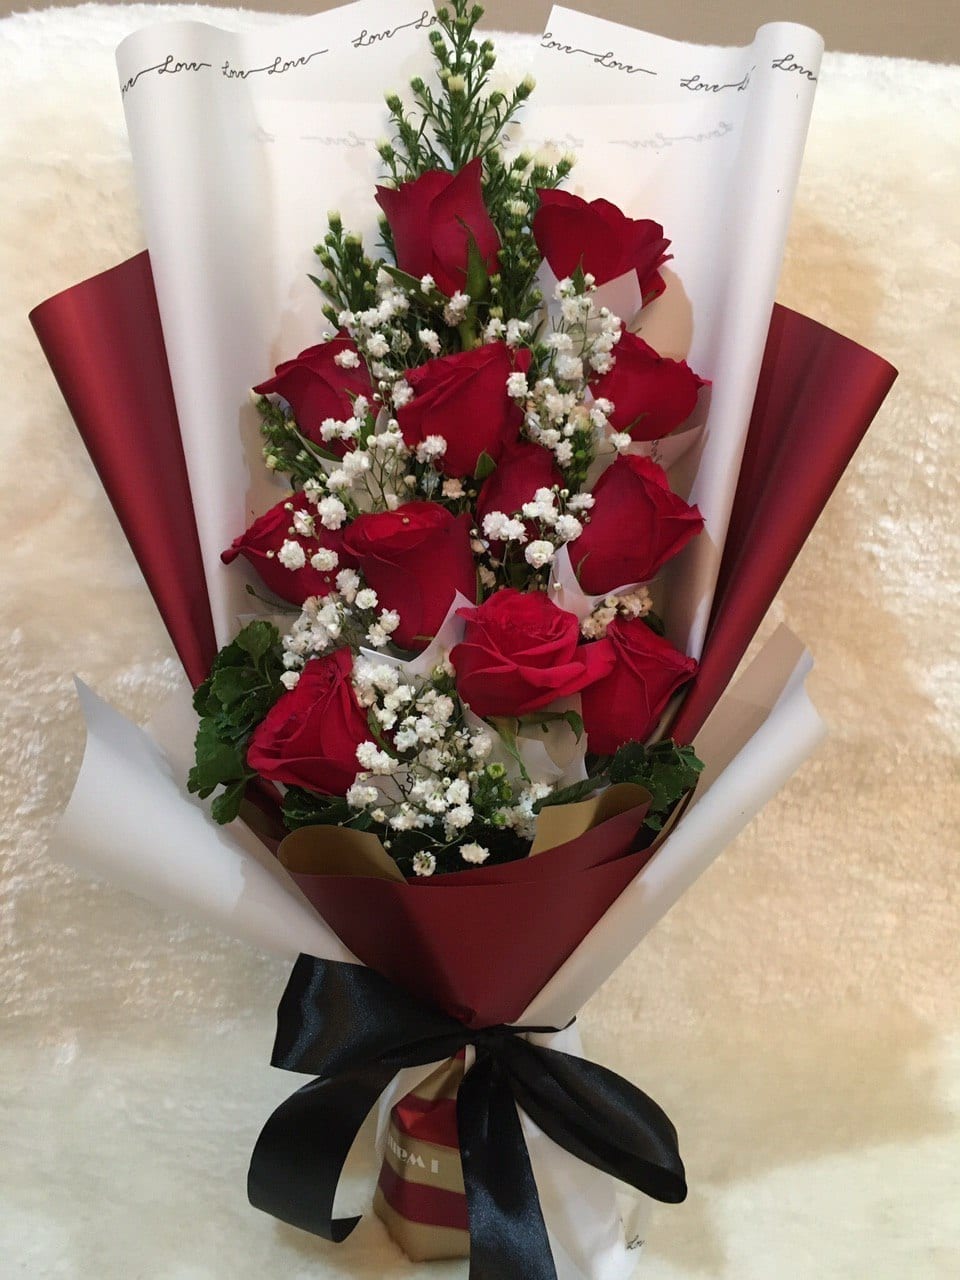 12 stalks of roses bouquet